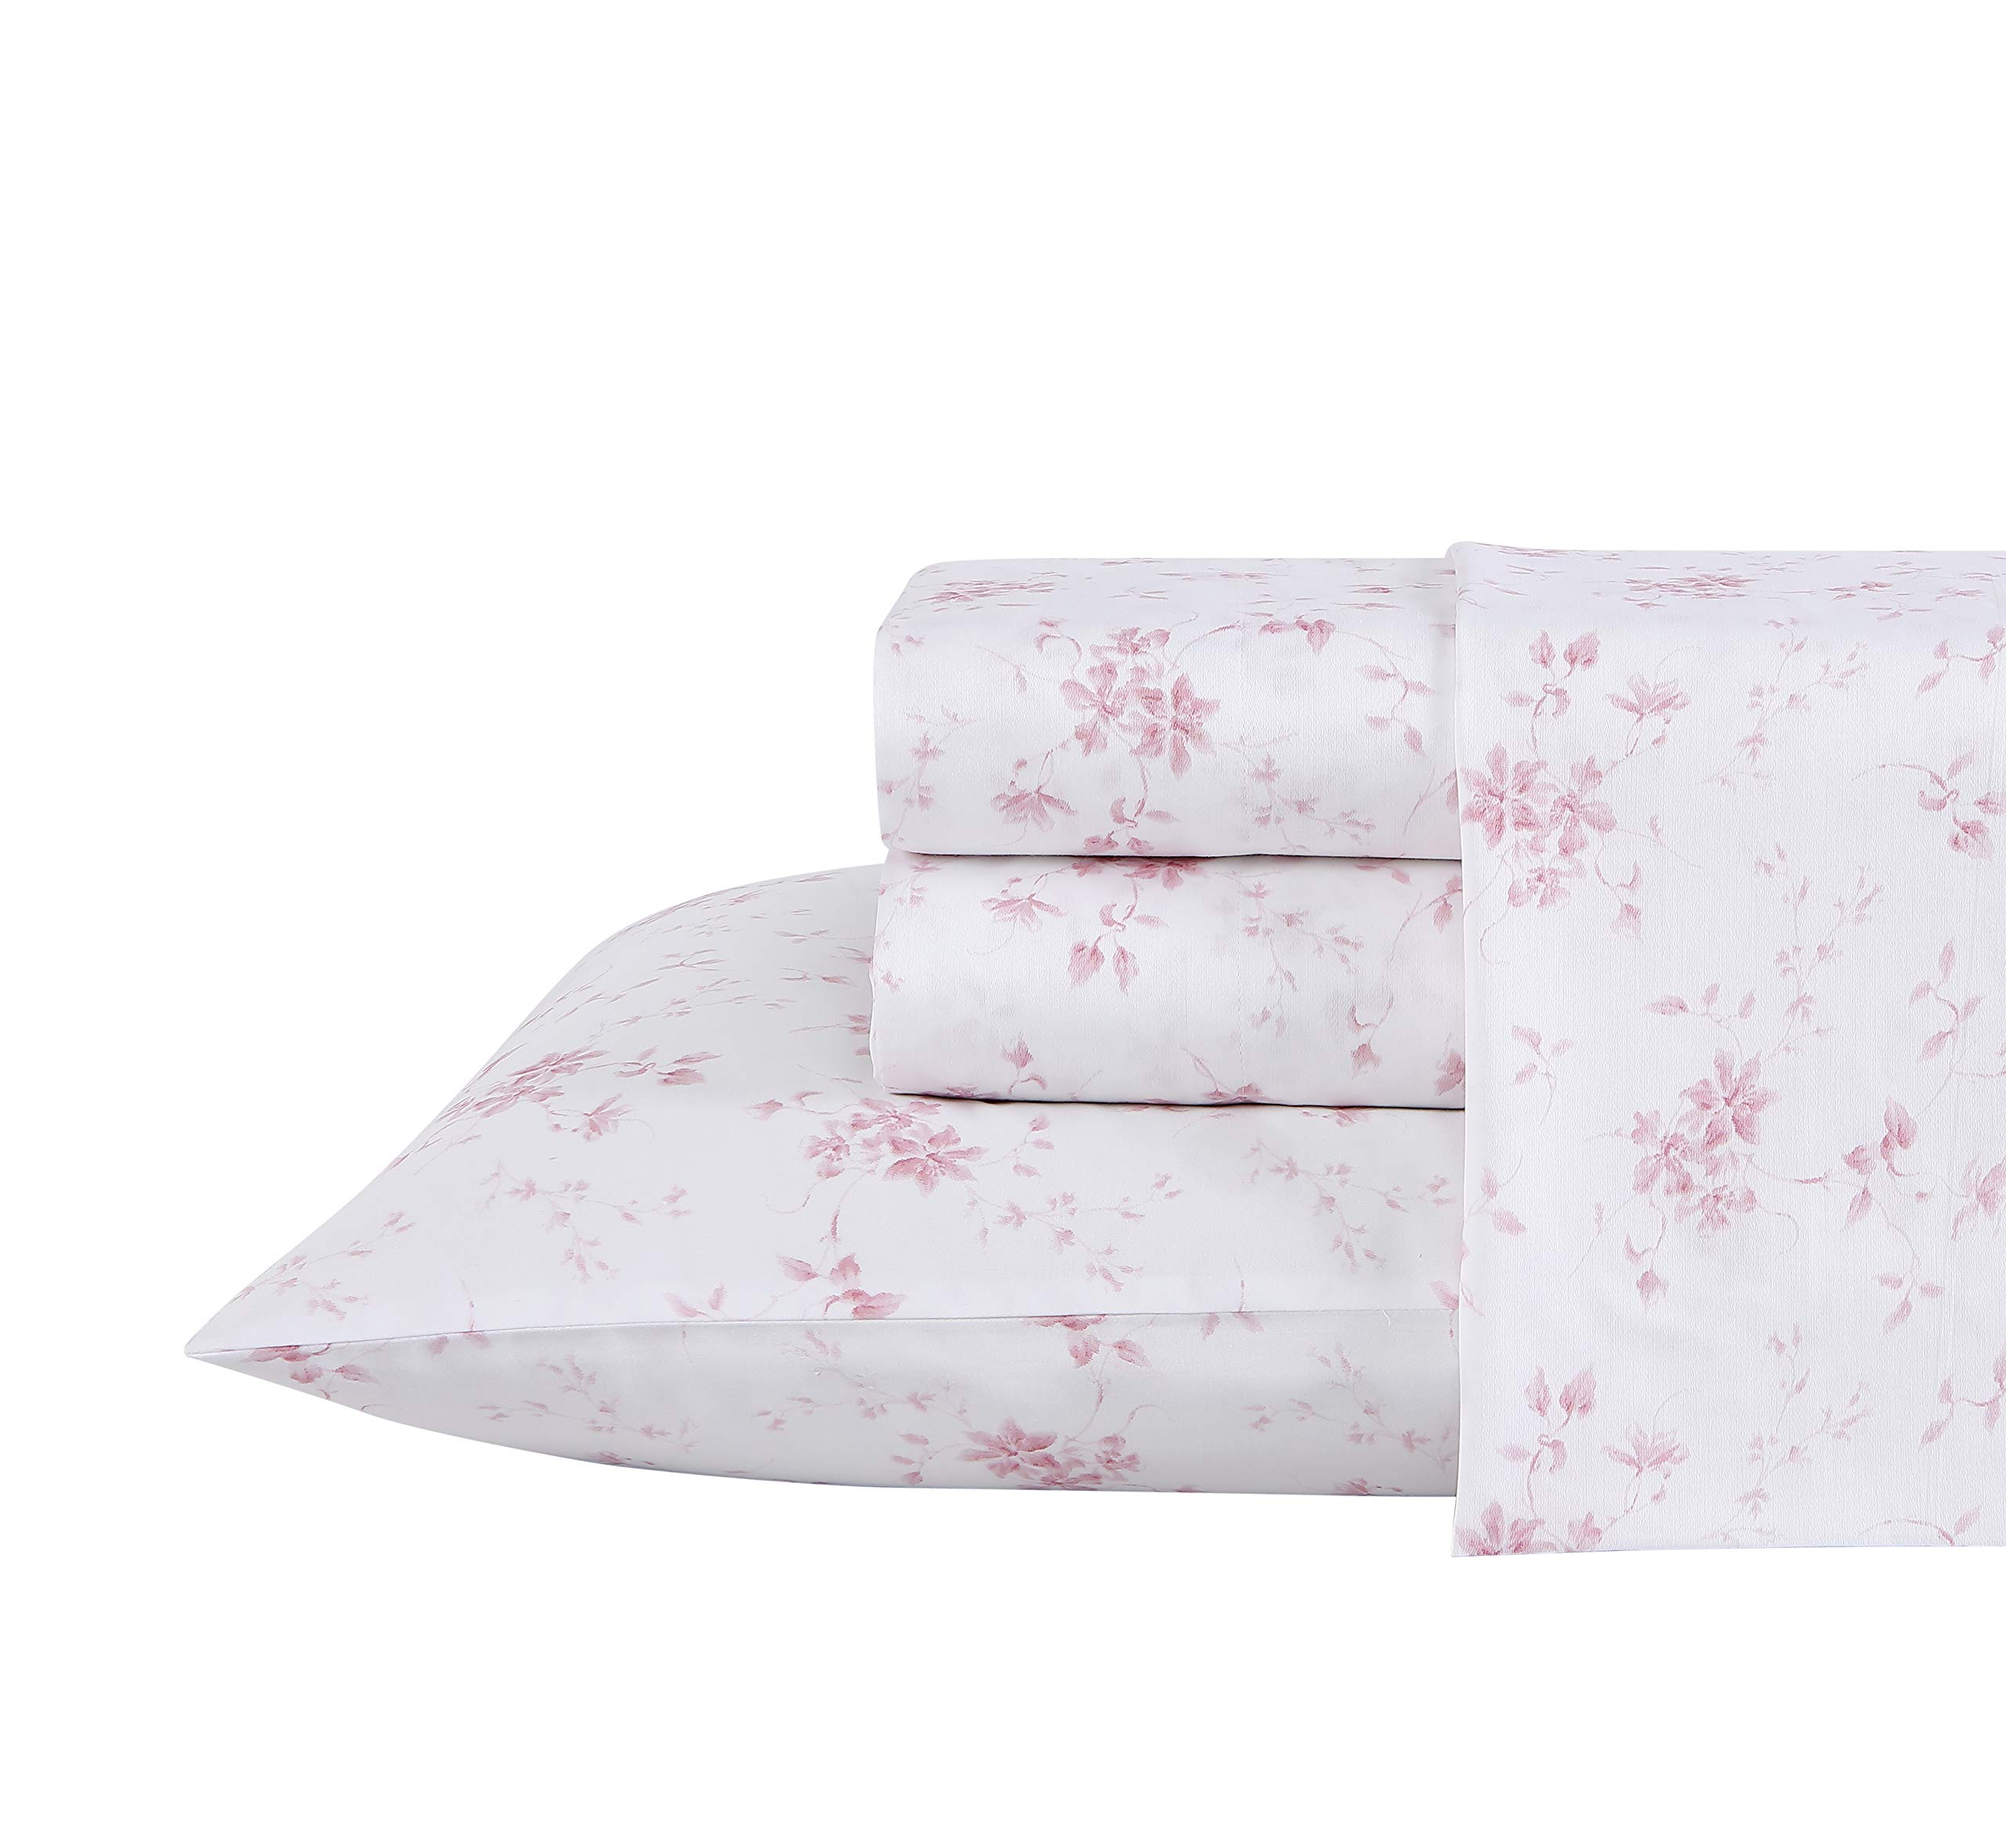 Laura Ashley Home - King Sheets, Soft Sateen Cotton Bedding Set - Sleek, Smooth, & Breathable Home Decor, Garden Muse Pink